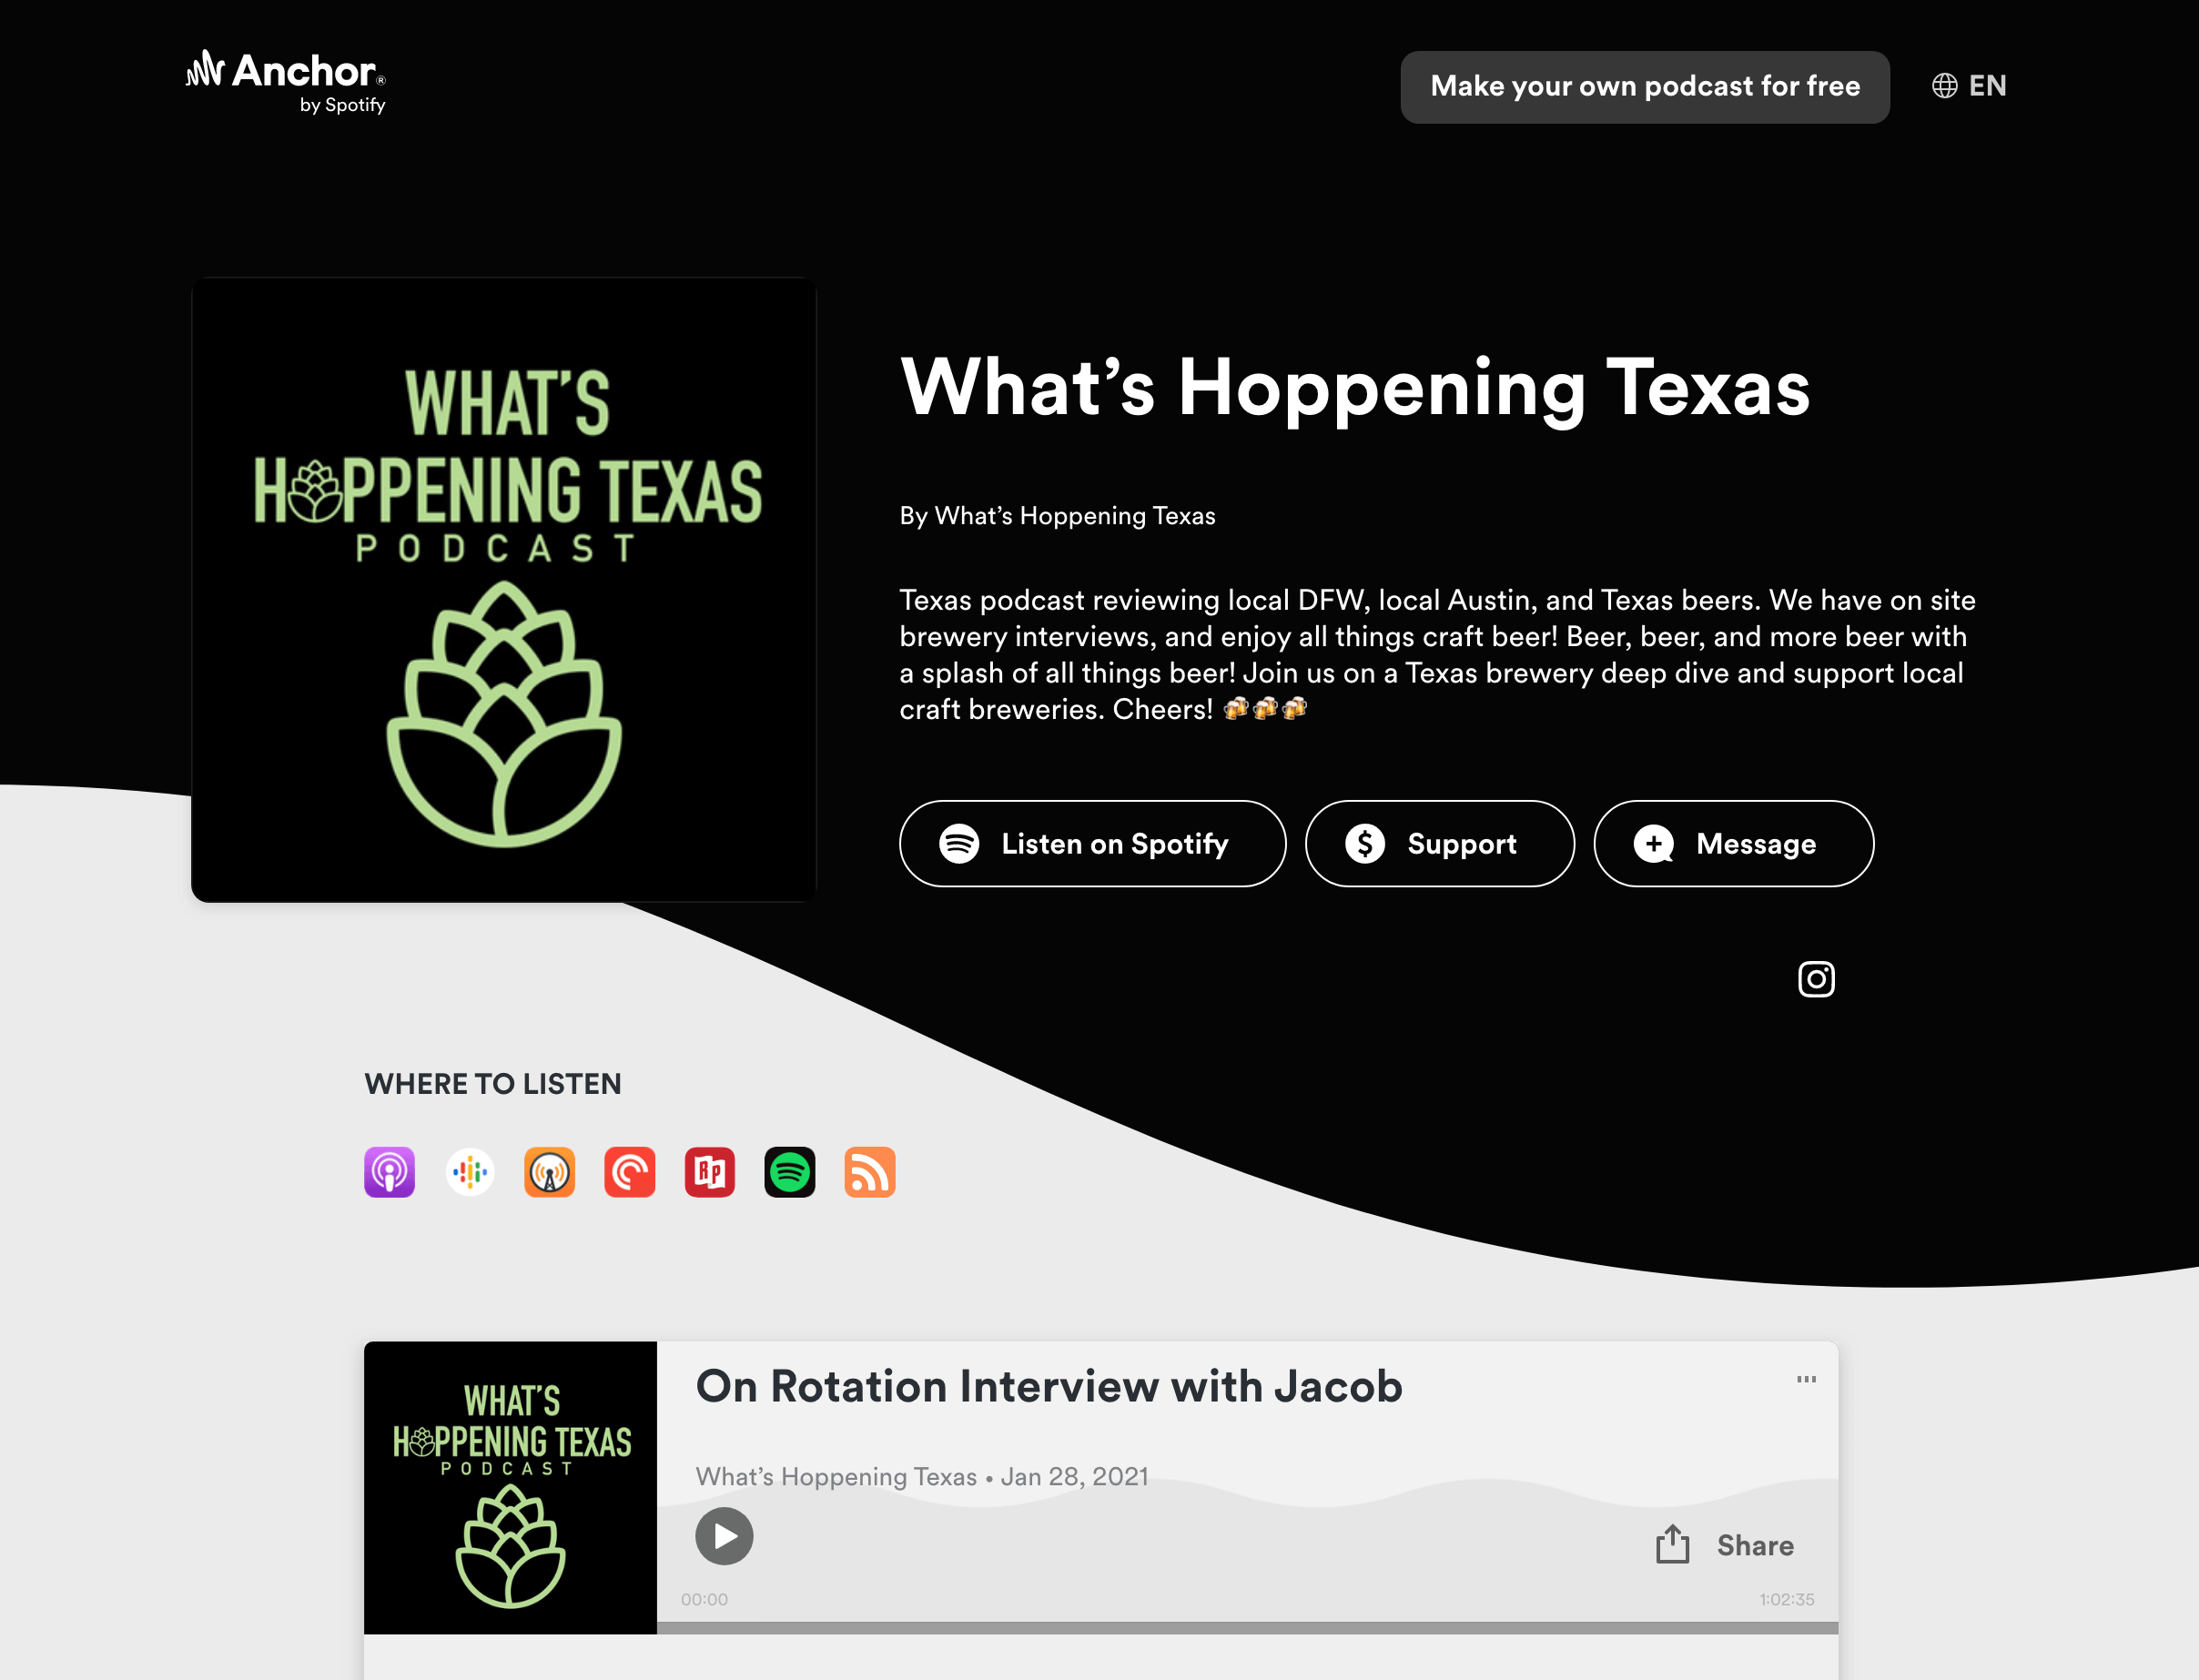 [What’s Hoppening Texas Podcast] On Rotation Interview with Jacob [Listen]